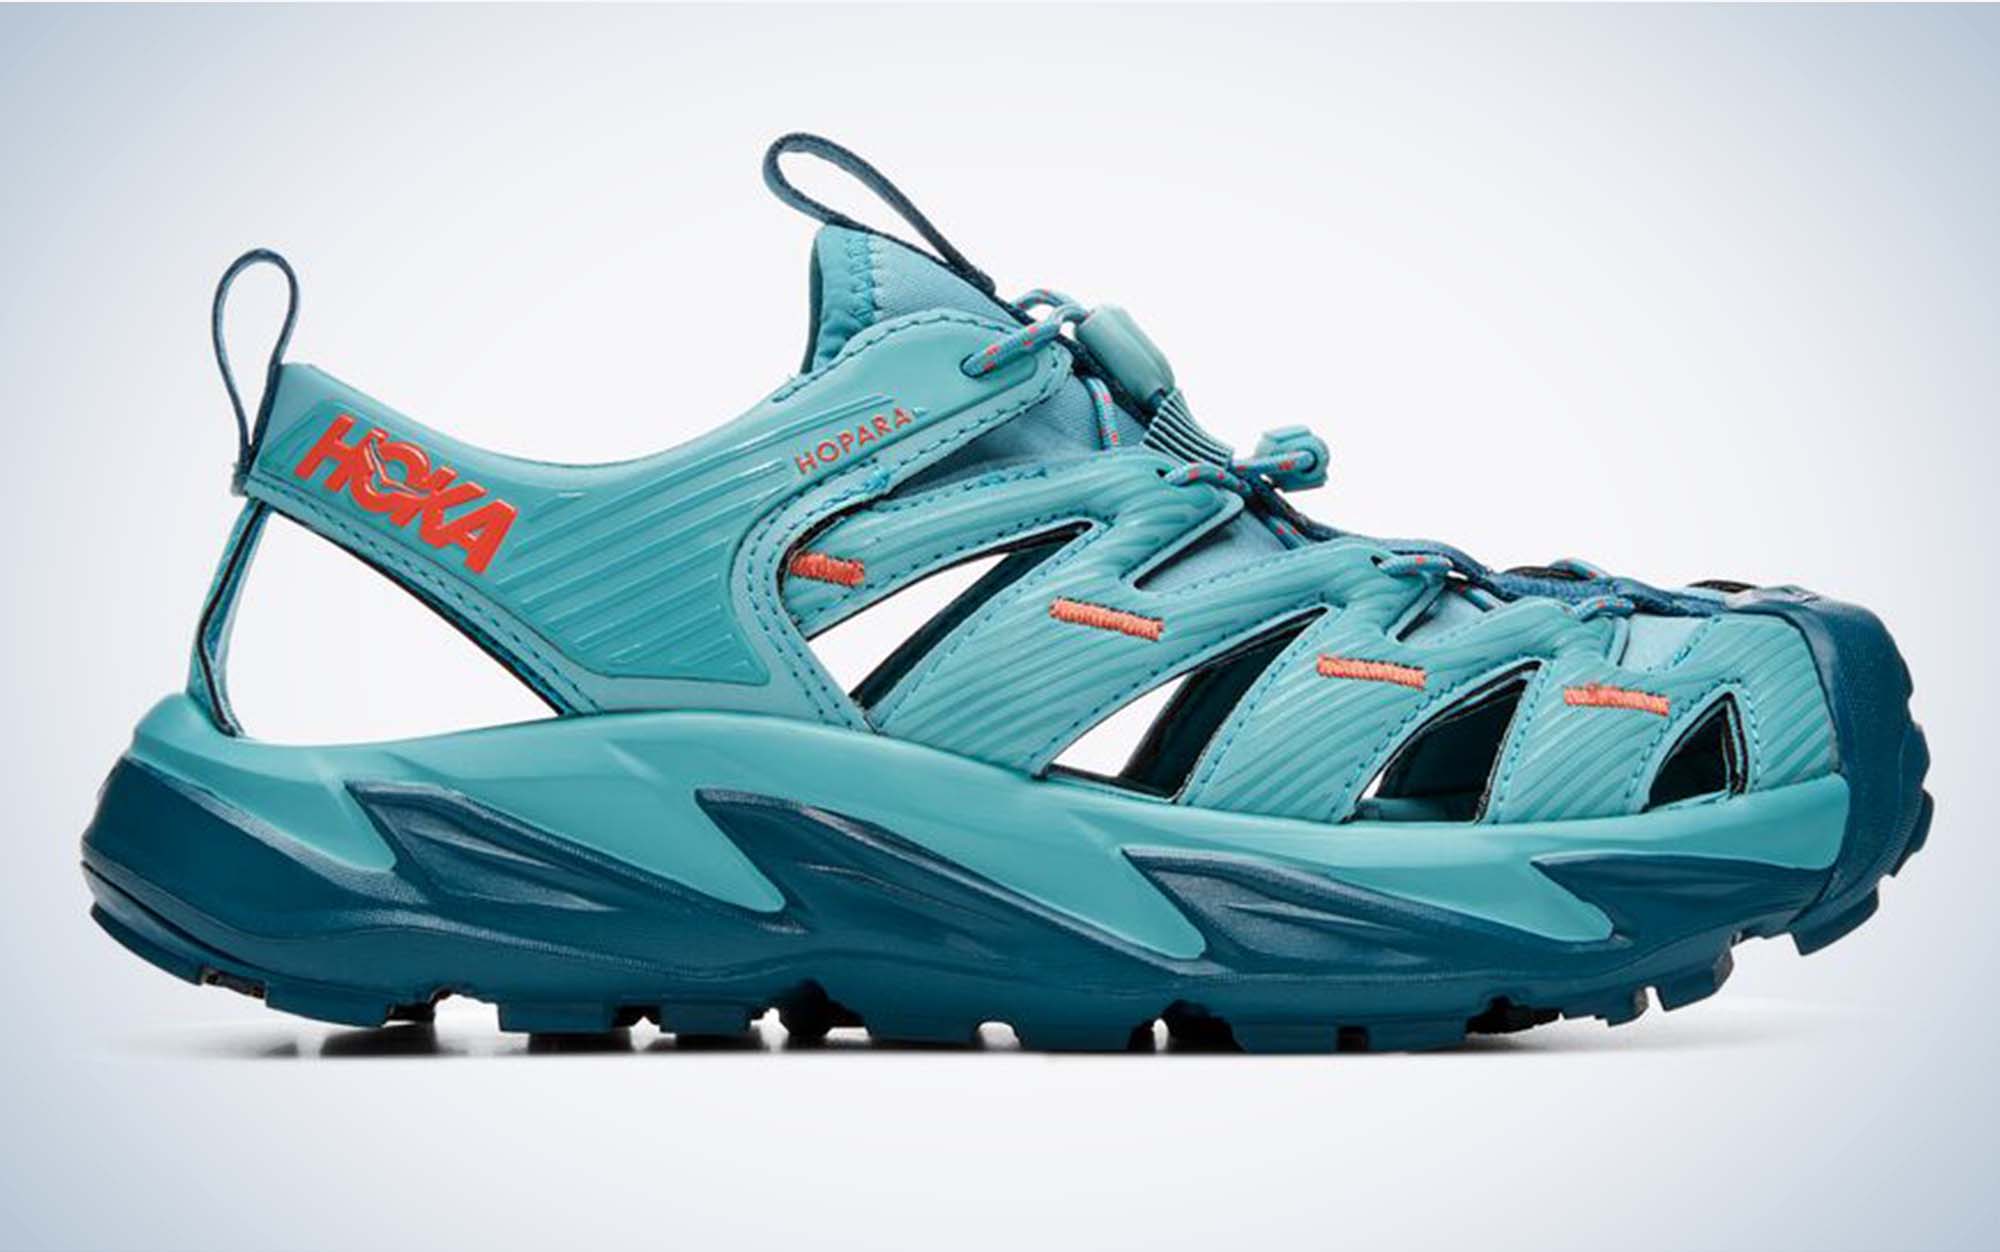 The HOKA ONE ONE Hopara are the most comfortable water shoes for hiking.